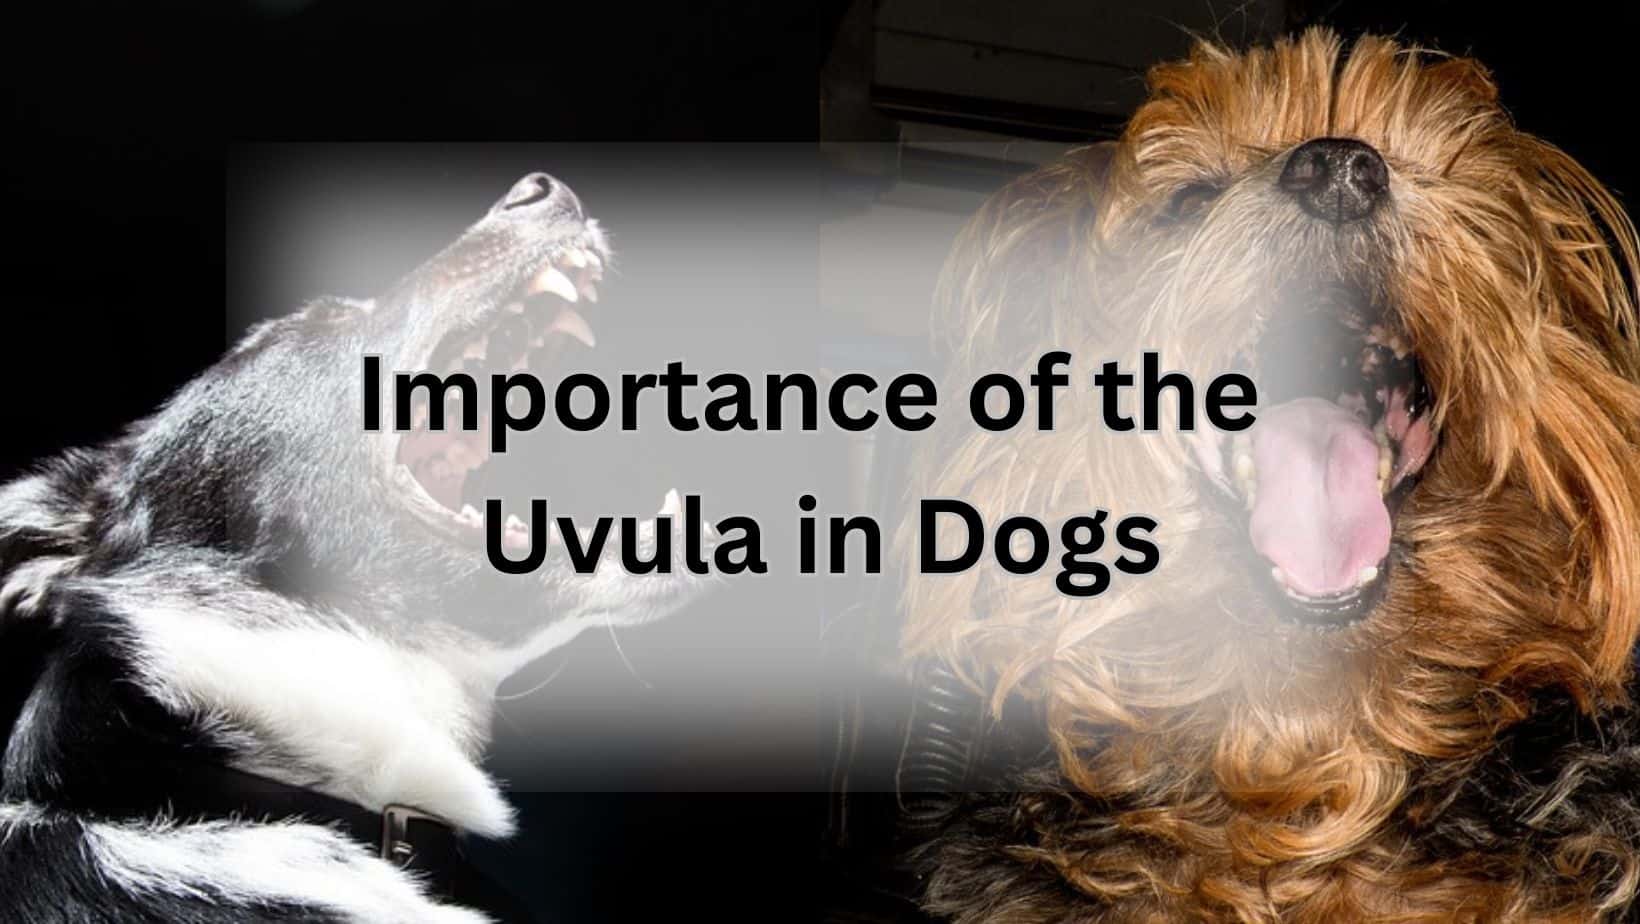 Importance of the Uvula in Dogs